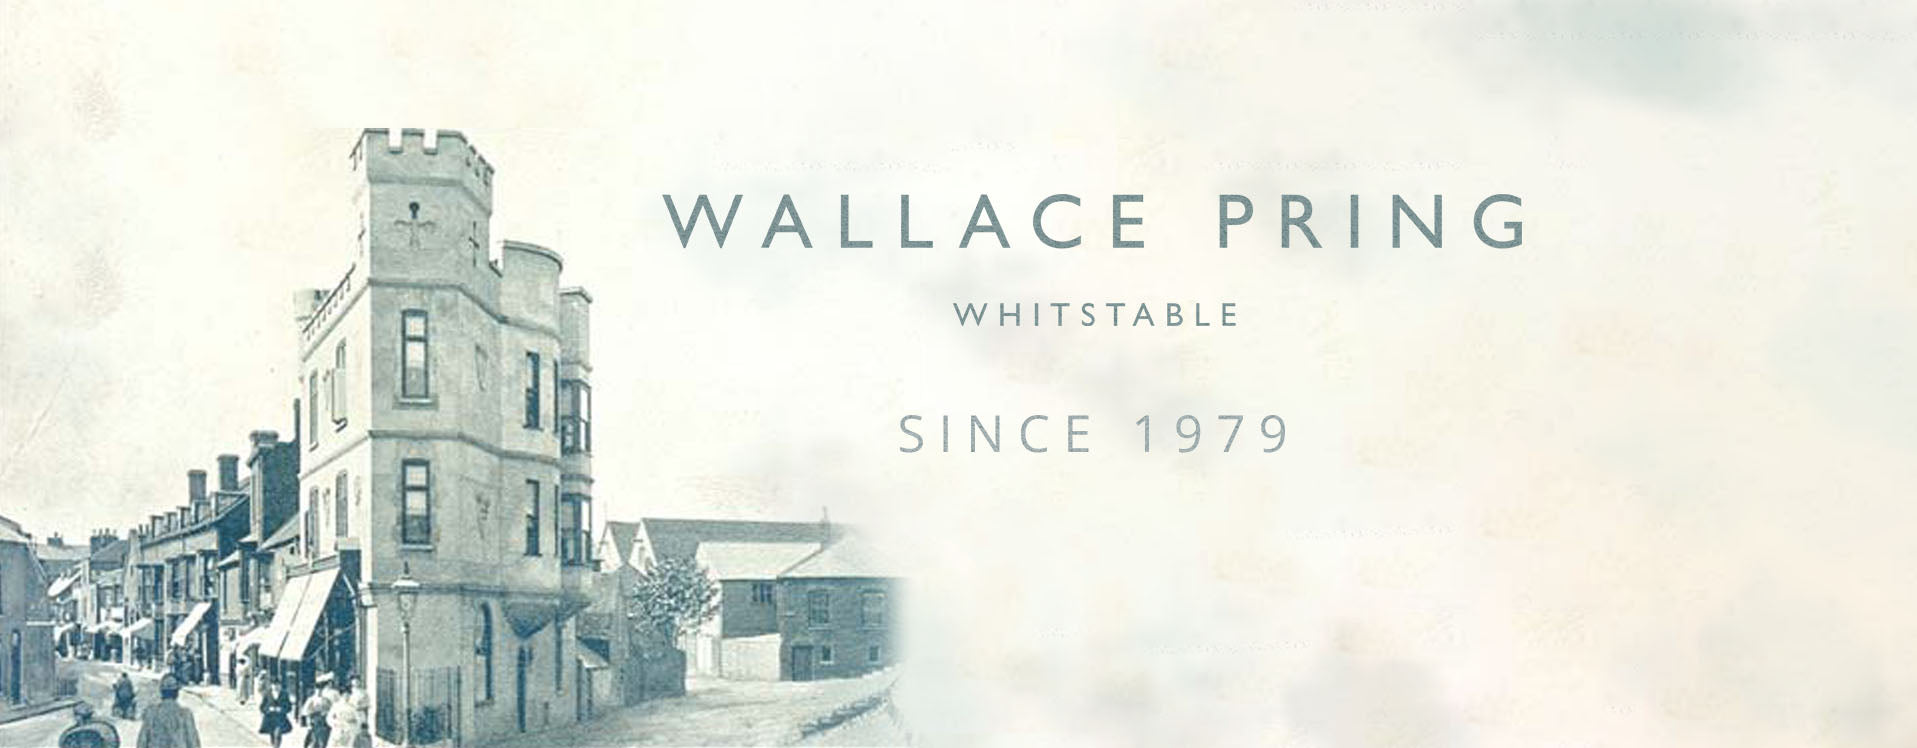 Wallace Pring, a clothing store in the historic seaside town of Whitstable. 